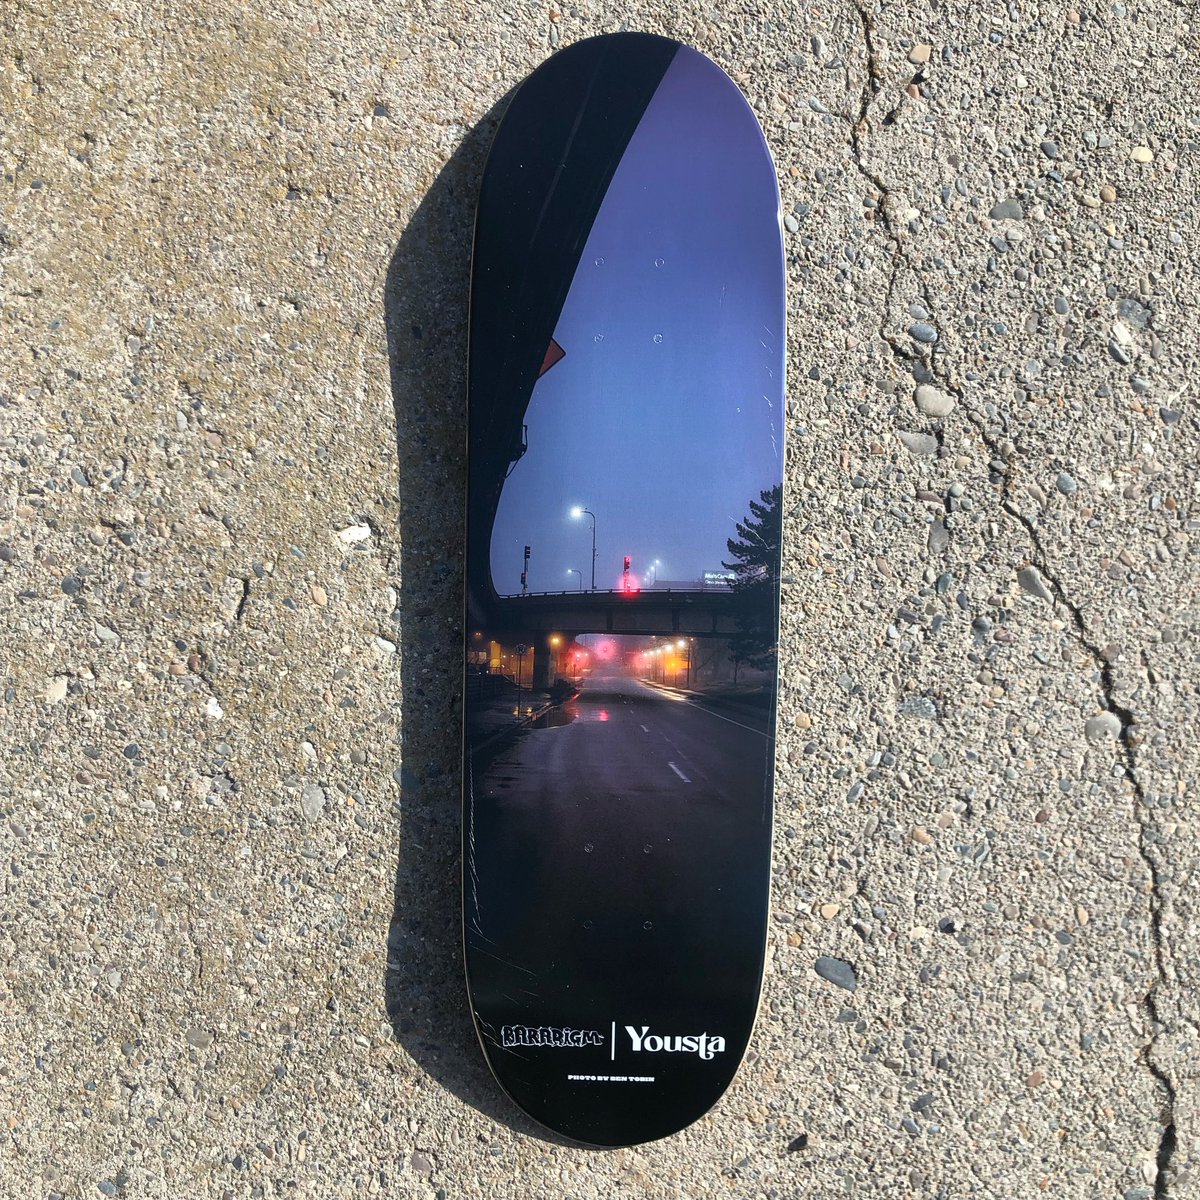 I currently have 20 skate decks of each to sell for $65 dollars each. I’m going to donate some of the profits to Jewels Helping Hands. I’ll let ya’ll know when you can buy one online or a skateboard shop locally in Spokane.